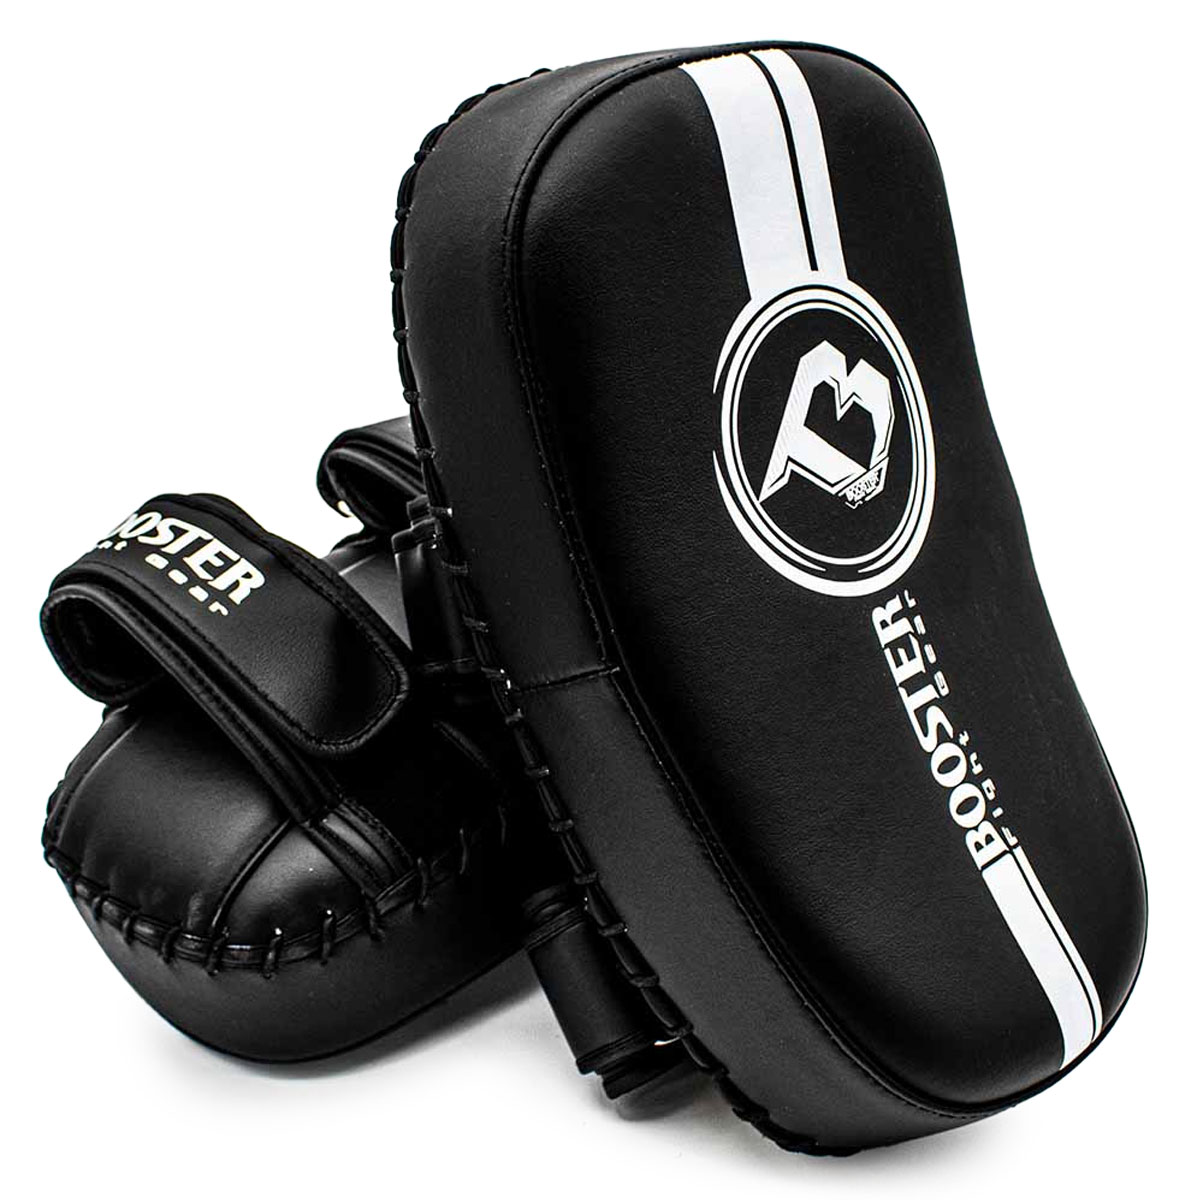 Thai pads Booster Dominance